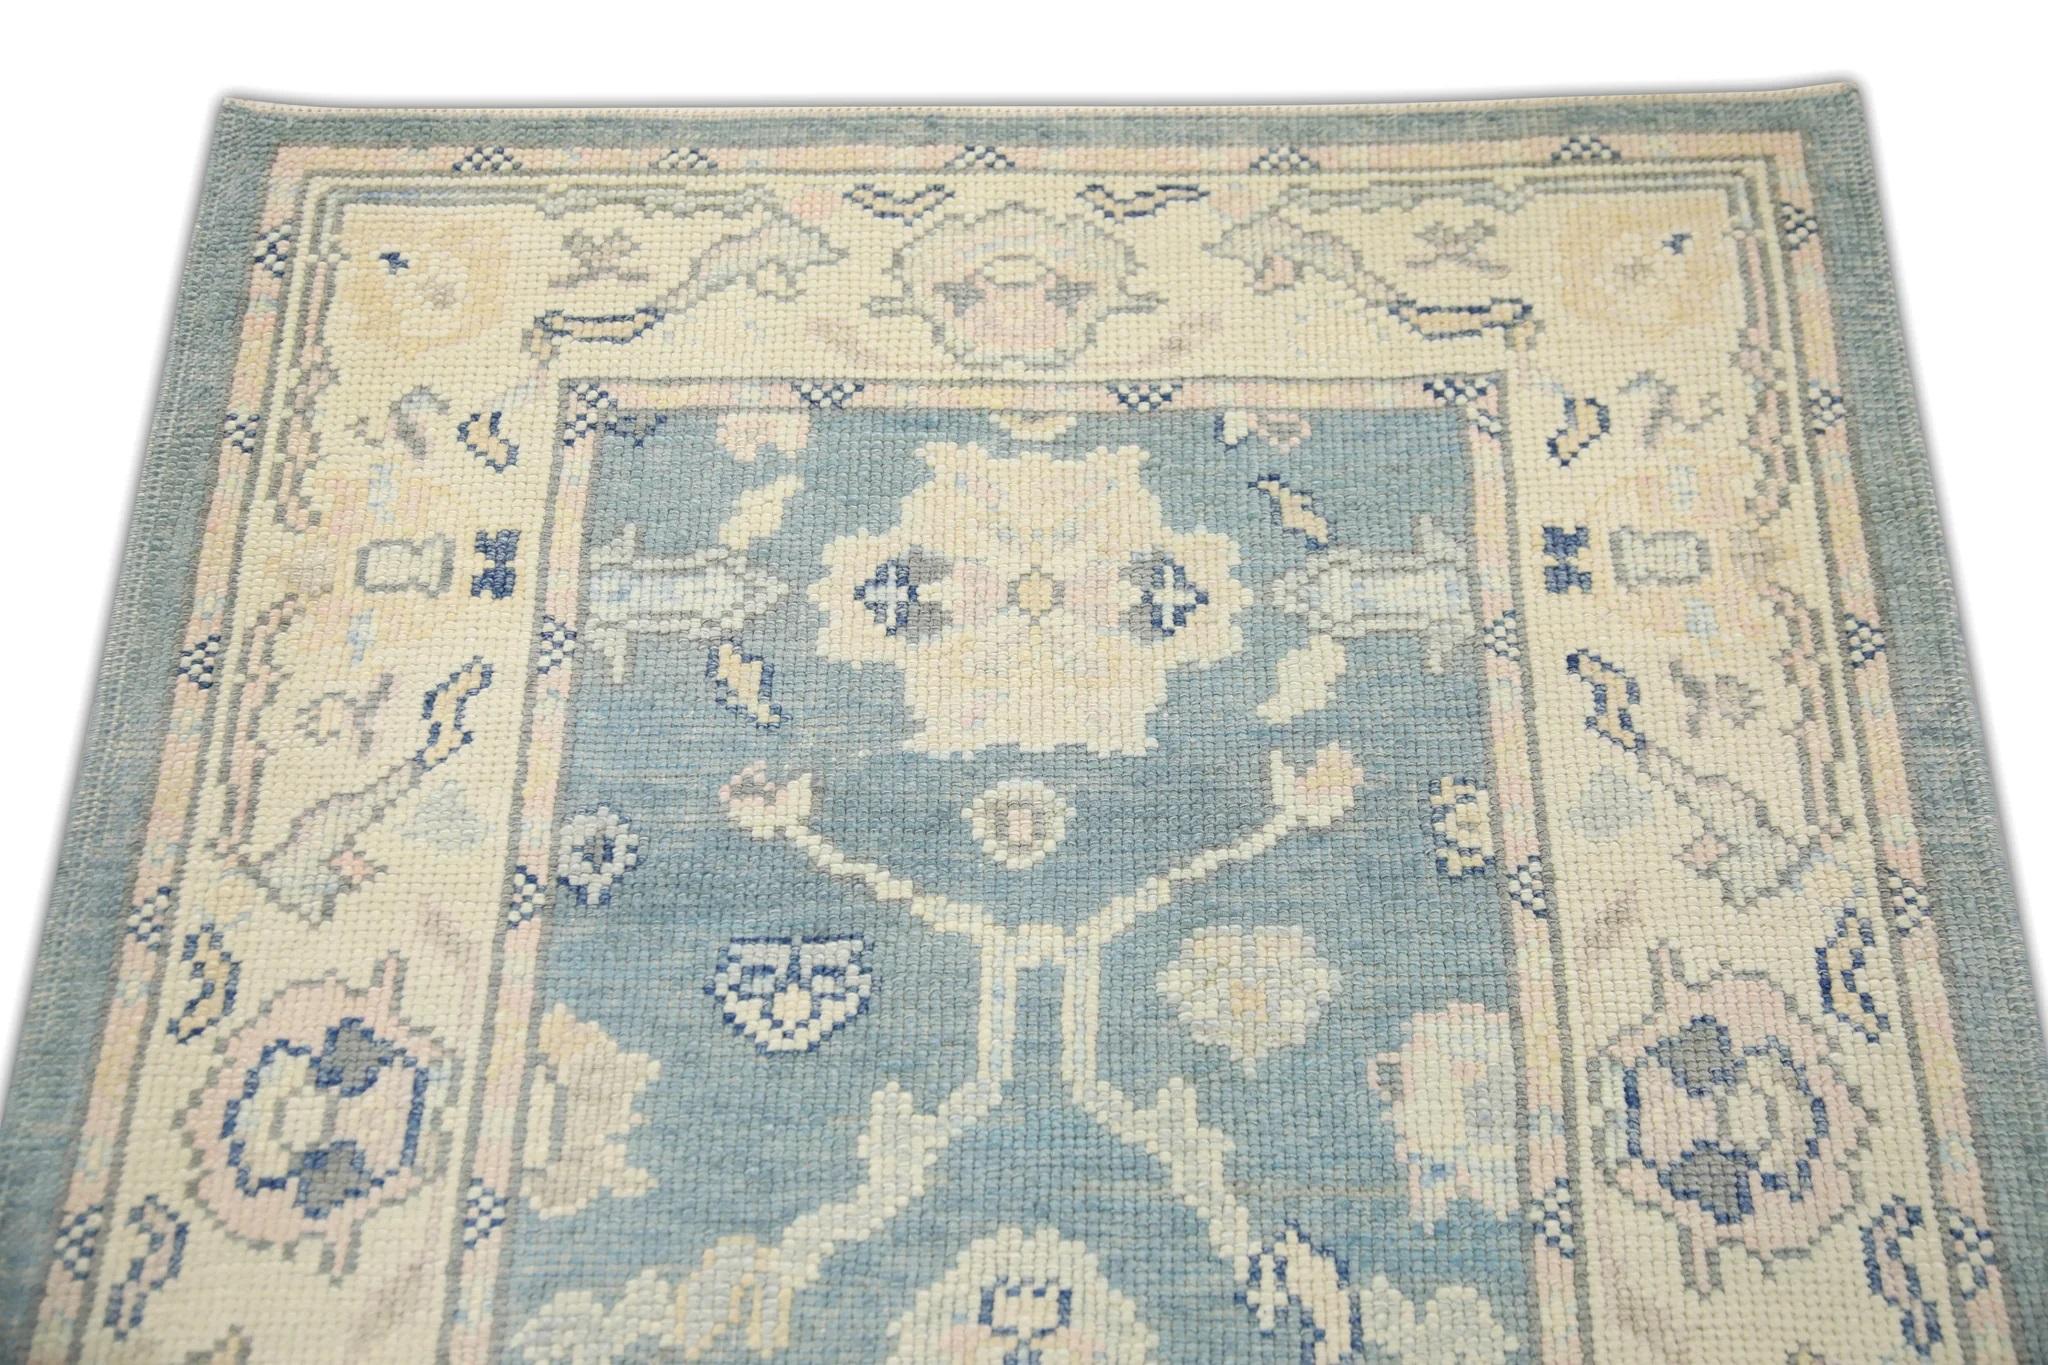 Vegetable Dyed Handwoven Wool Turkish Oushak Rug in Blue Floral Design 3' x 4'10